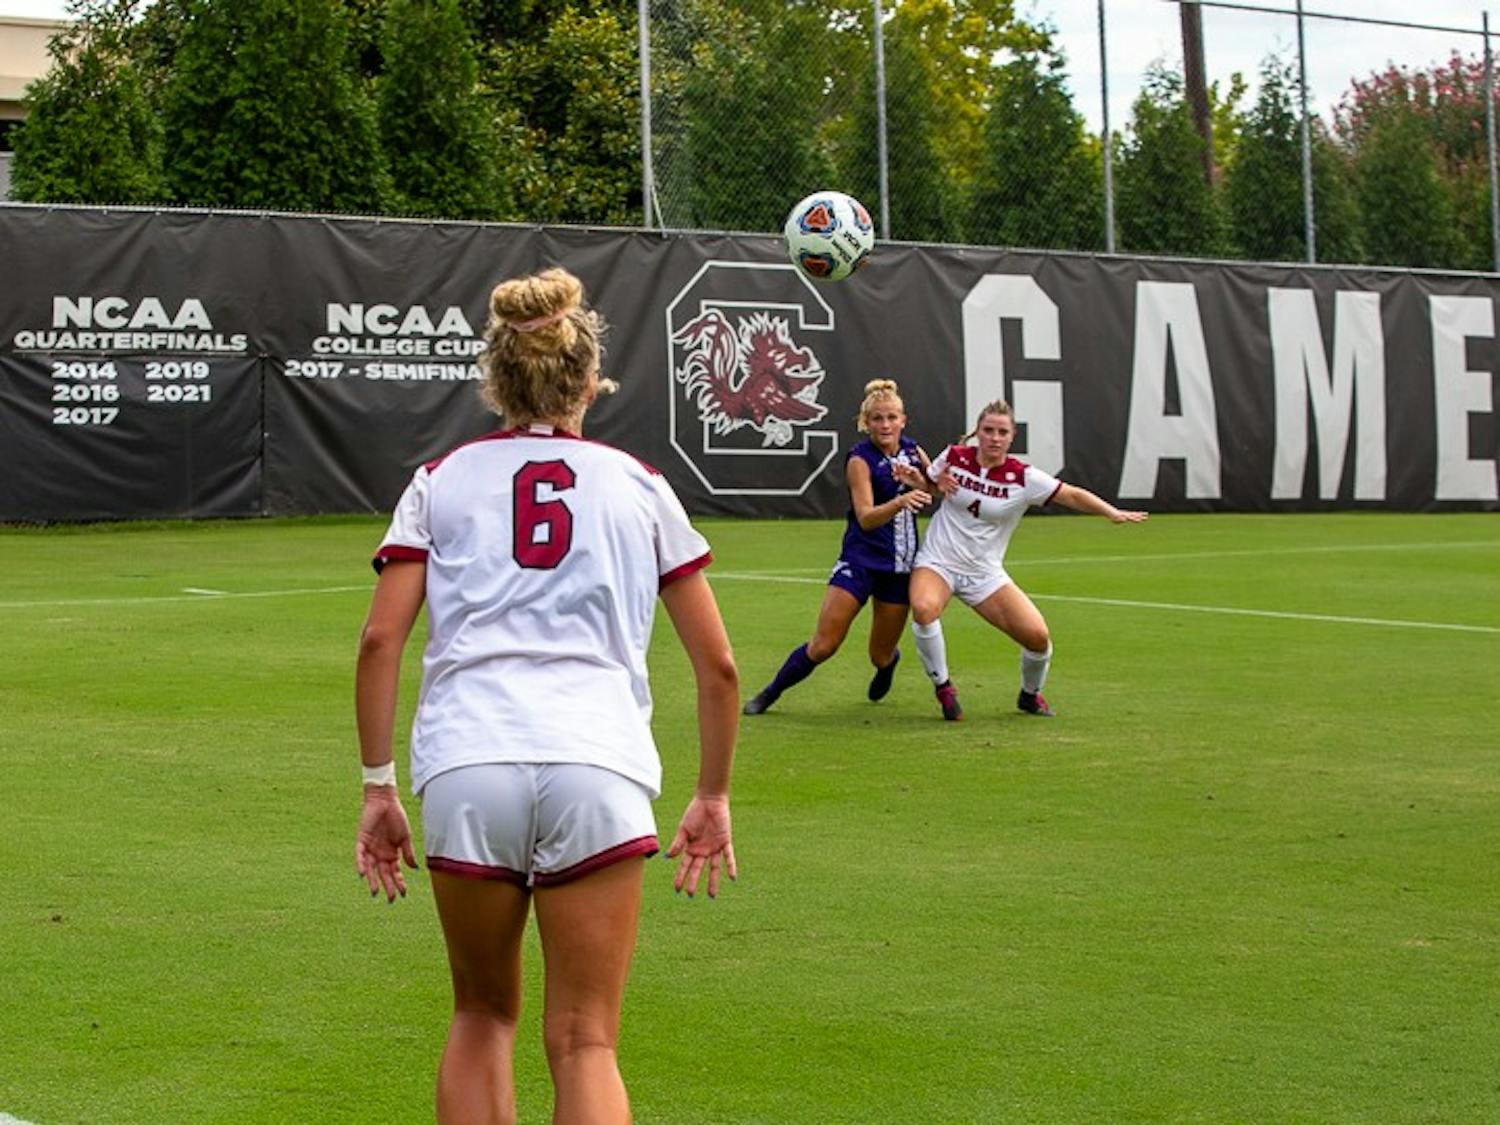 Senior Defender Camryn Dixon throws in the ball to Freshman Forward Shae O'Rourke during the team's game against East Carolina on August 21, 2022.